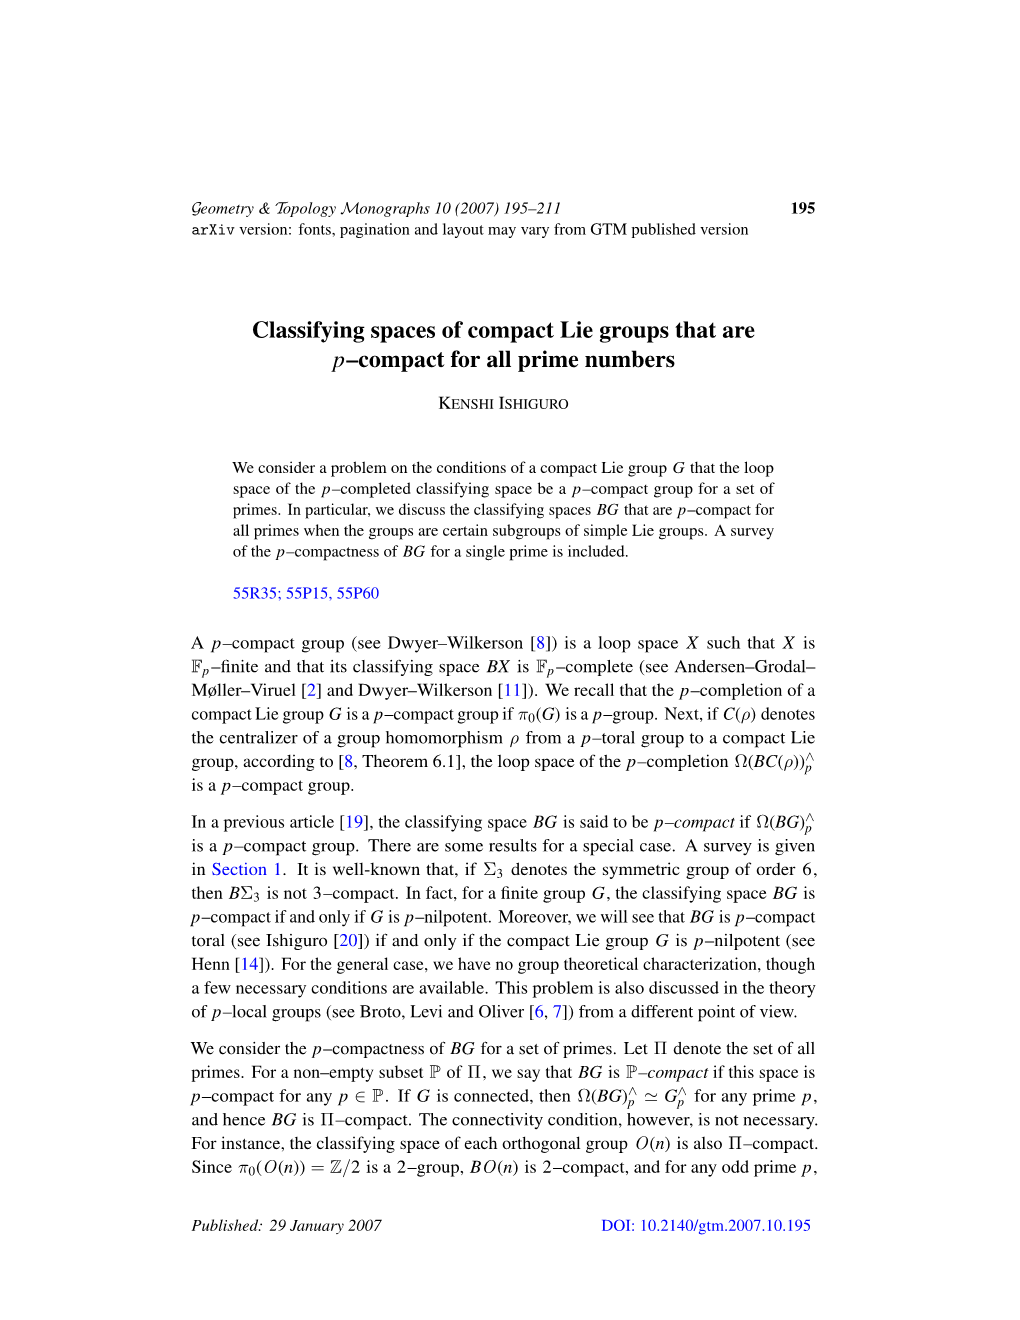 Classifying Spaces of Compact Lie Groups That Are P–Compact for All Prime Numbers